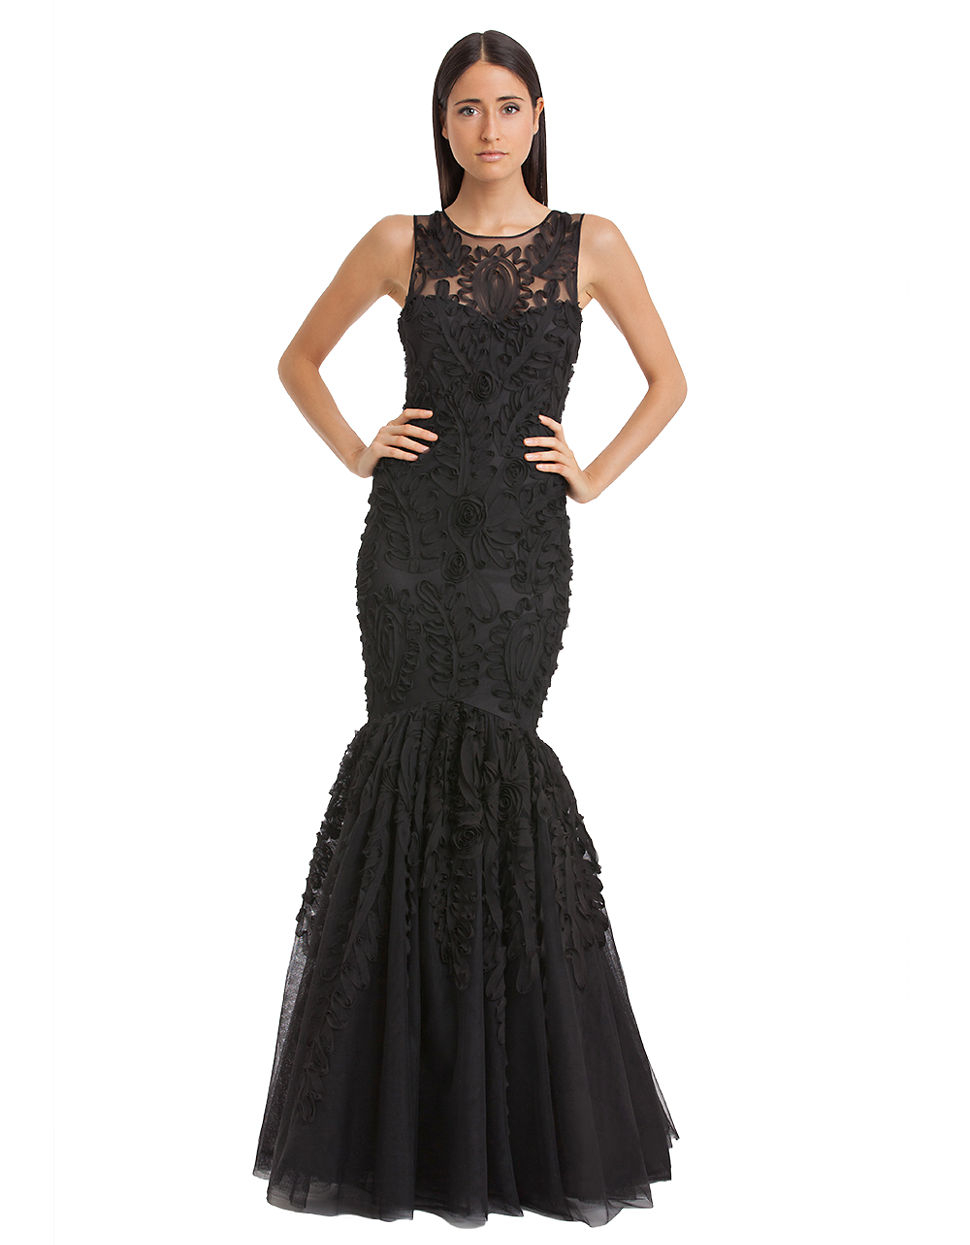 Js collections Chiffon Soutache Mermaid Gown in Black | Lyst